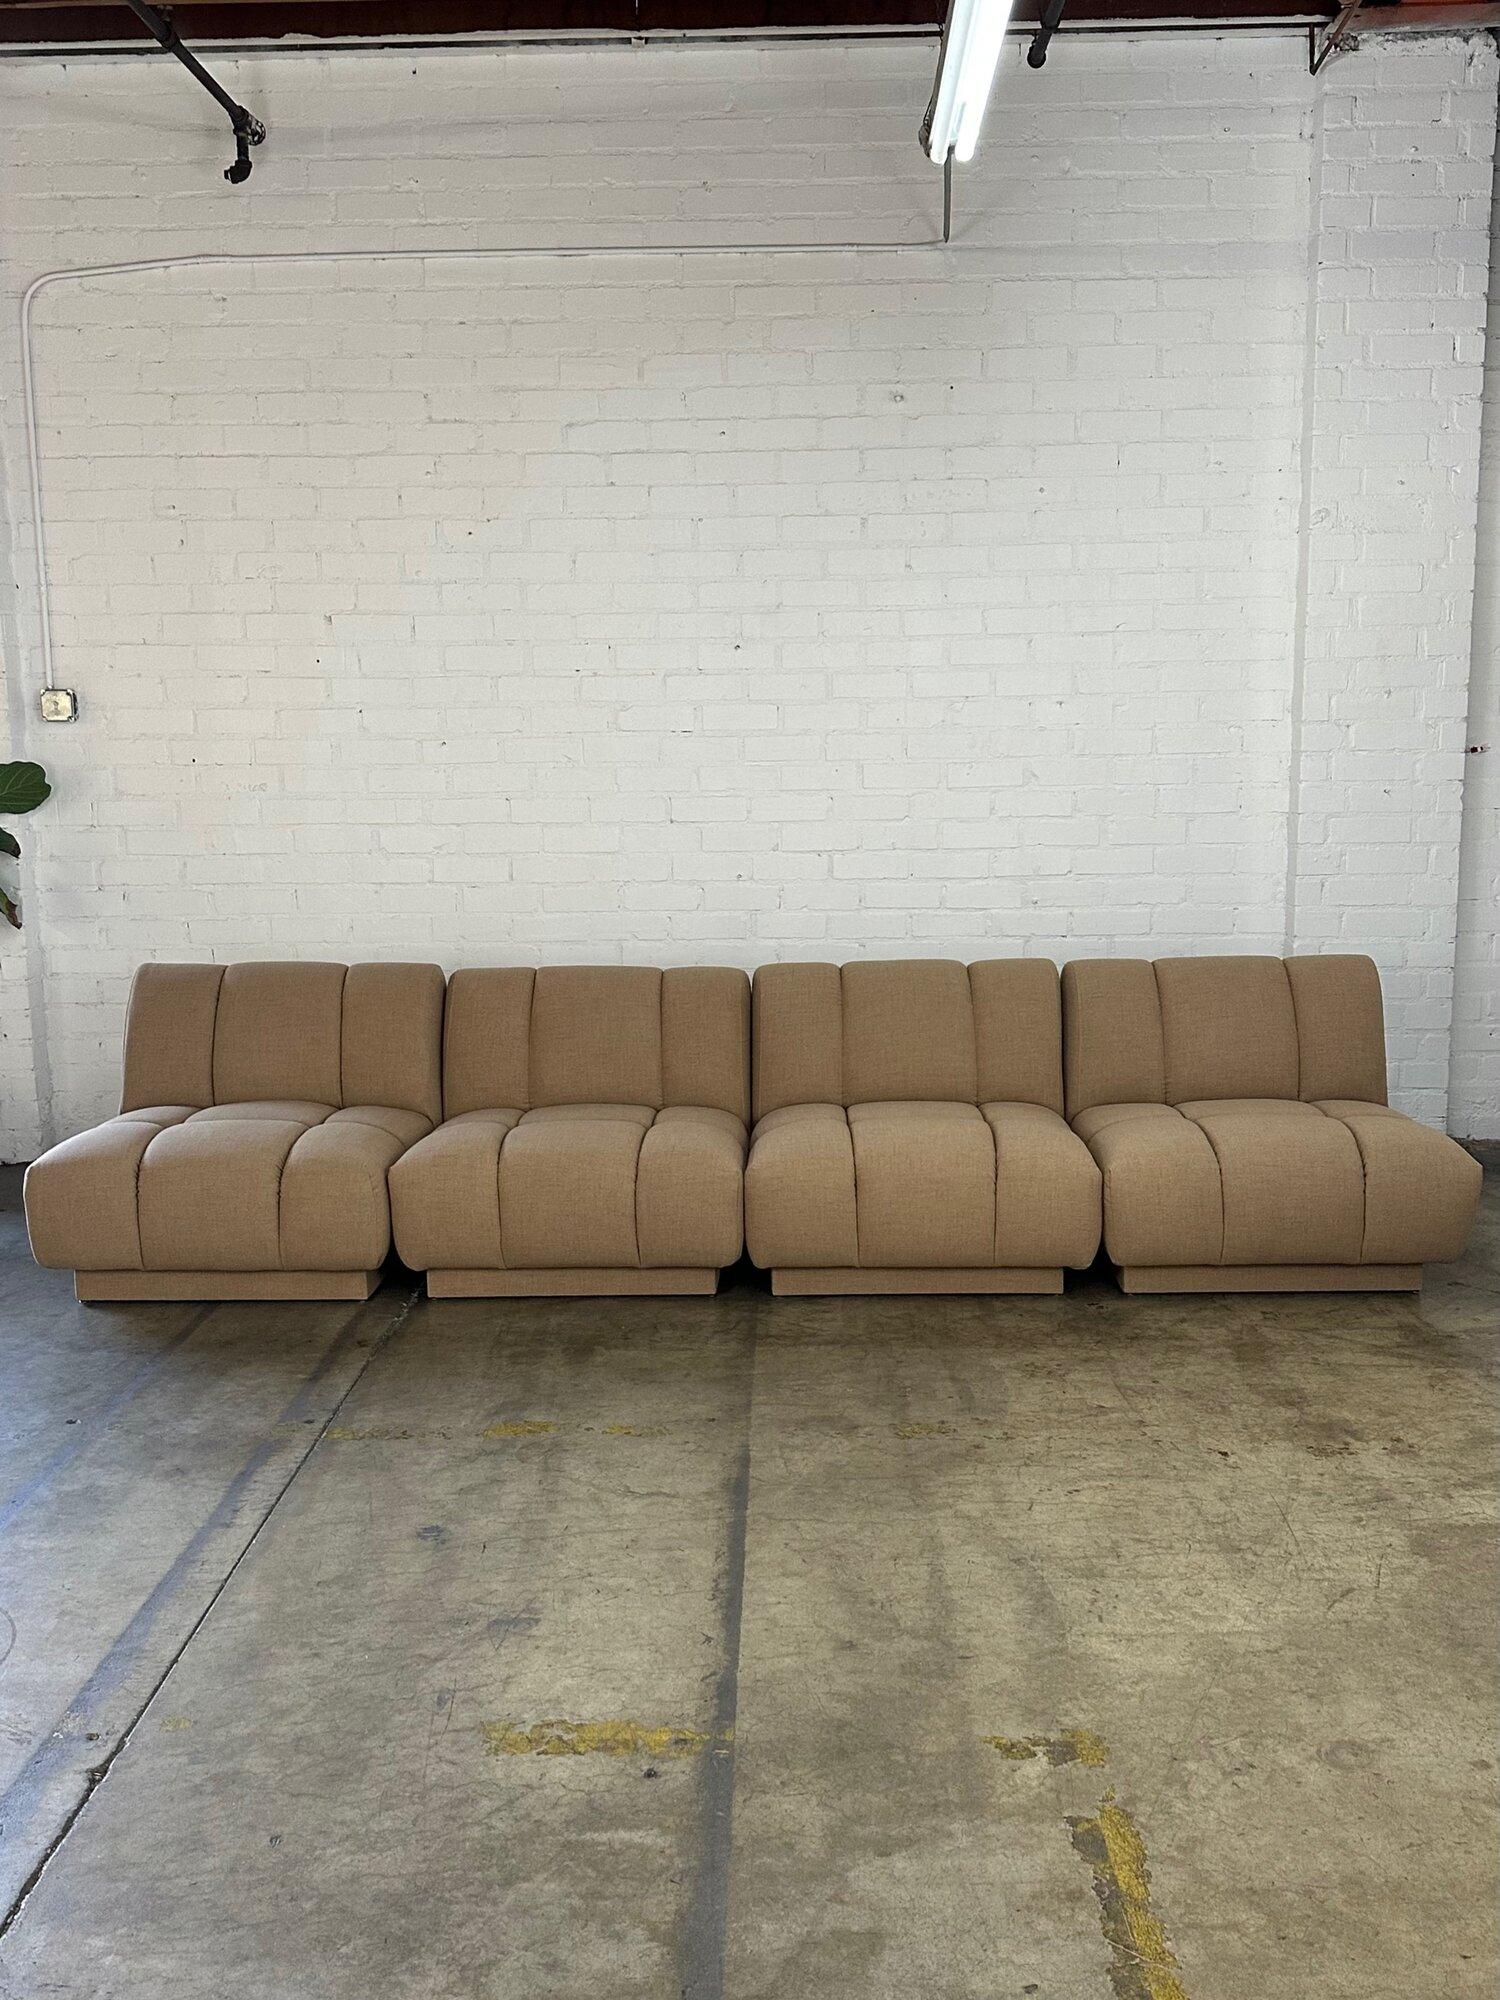 W34 D35 H30 SW32 SD23 SH15

Handcrafted Modular seating made completely in house. Great deep ample seating with a slightly reclined back rest. Sectional is being sold separately. Each unit sits on a fully upholstered plinth base. Sections features